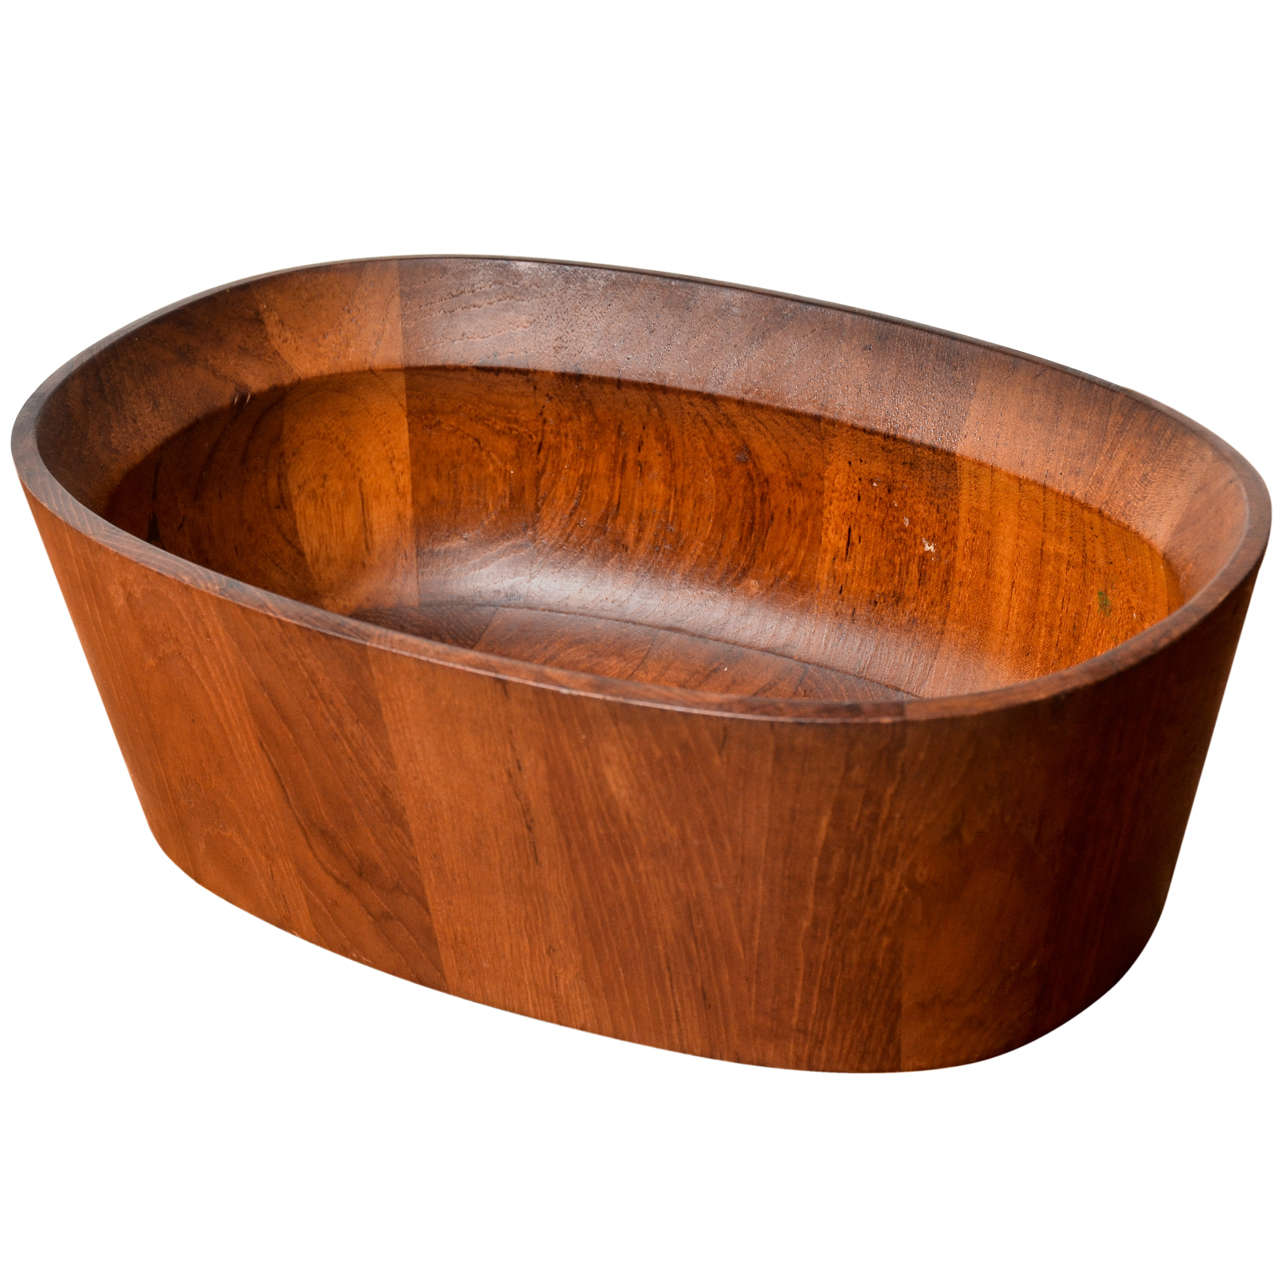 Staved Teak Oval Centerpiece by Jens Quistgaard For Sale